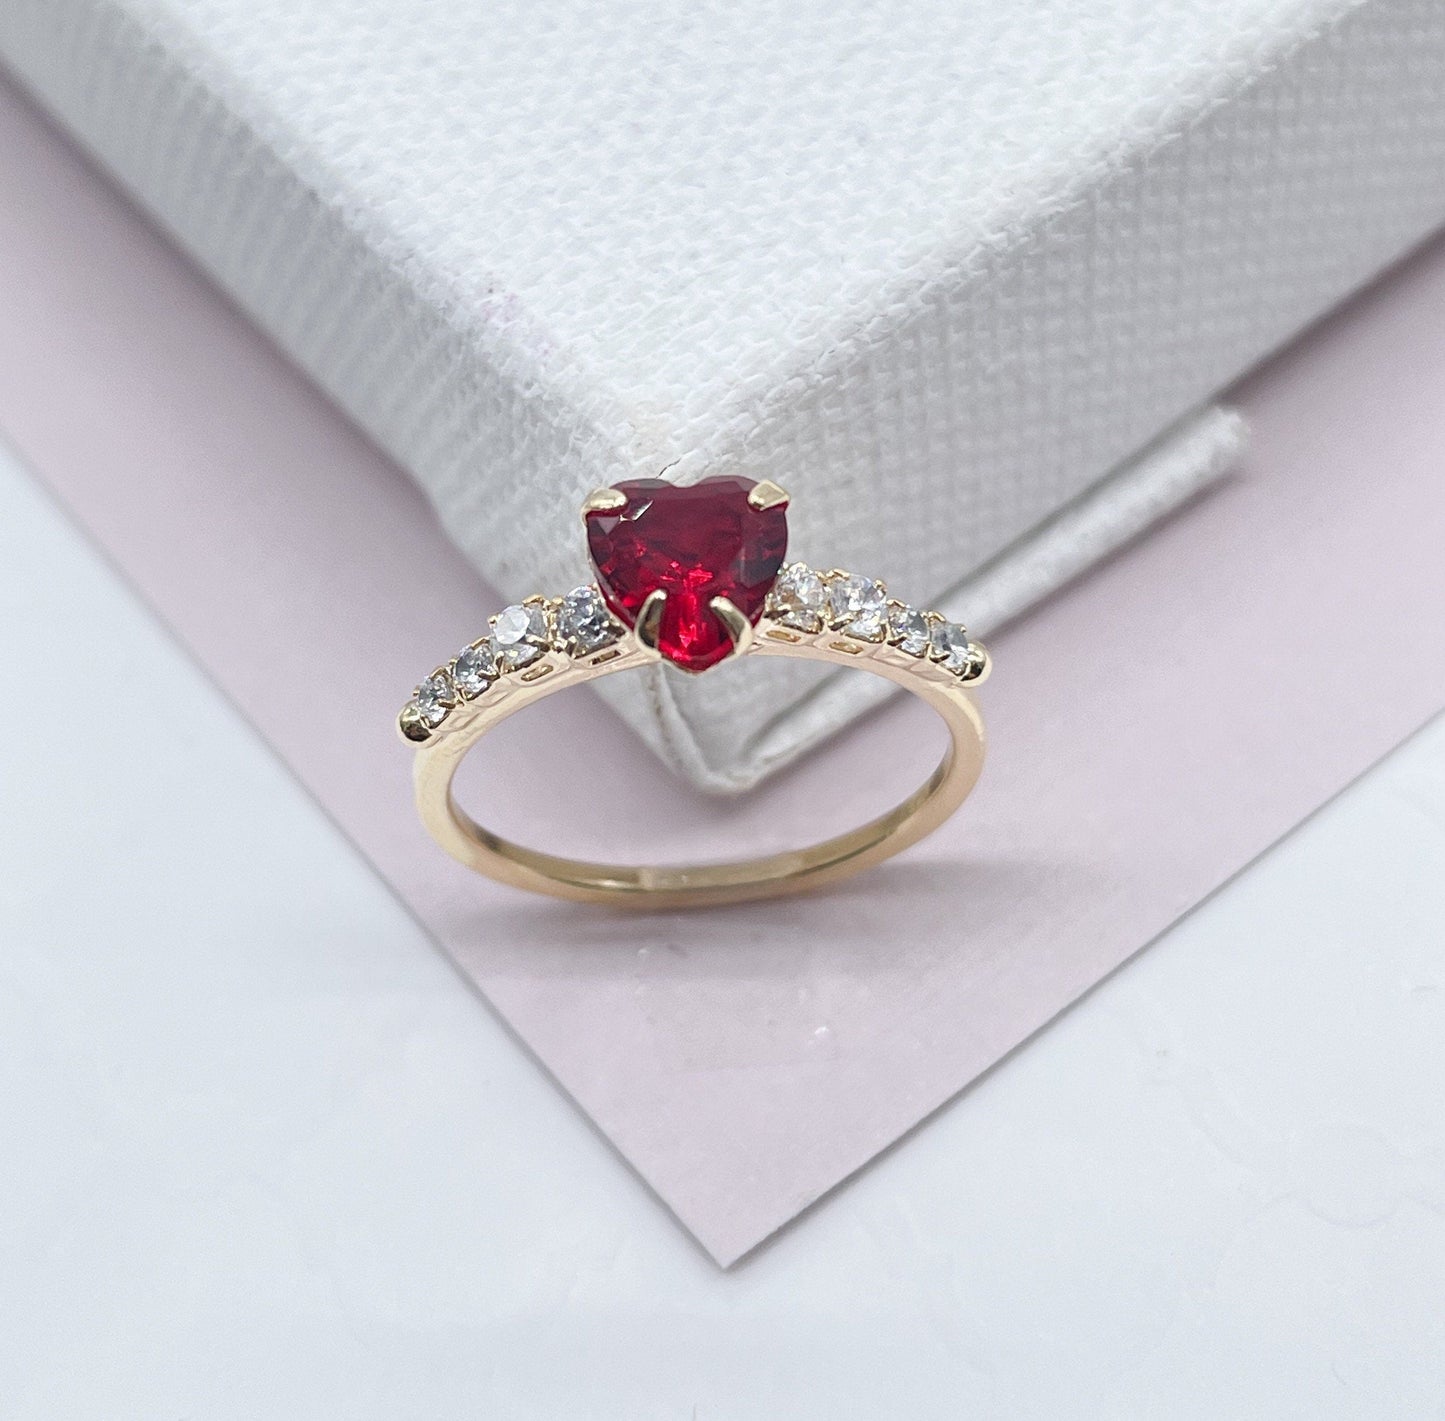 18k Gold Layered Heart Ring With Small Pave Colorless Cubic Zirconia Stones On